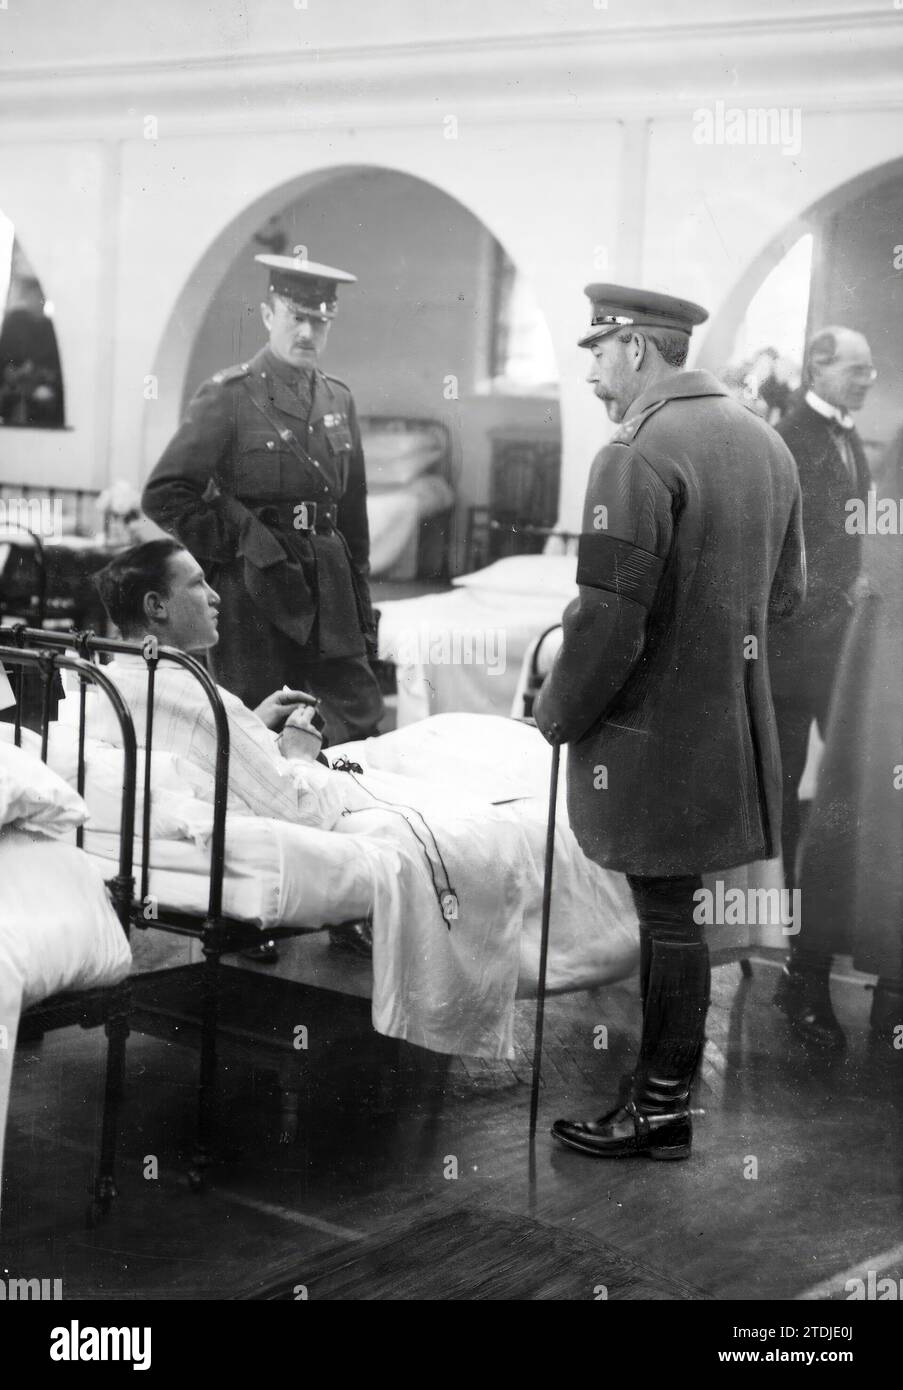 11/01/1914. The King of England and his Troops. The English Monarch, George V, Visiting the Wounded Indians in the Hospital. Credit: Album / Archivo ABC Stock Photo